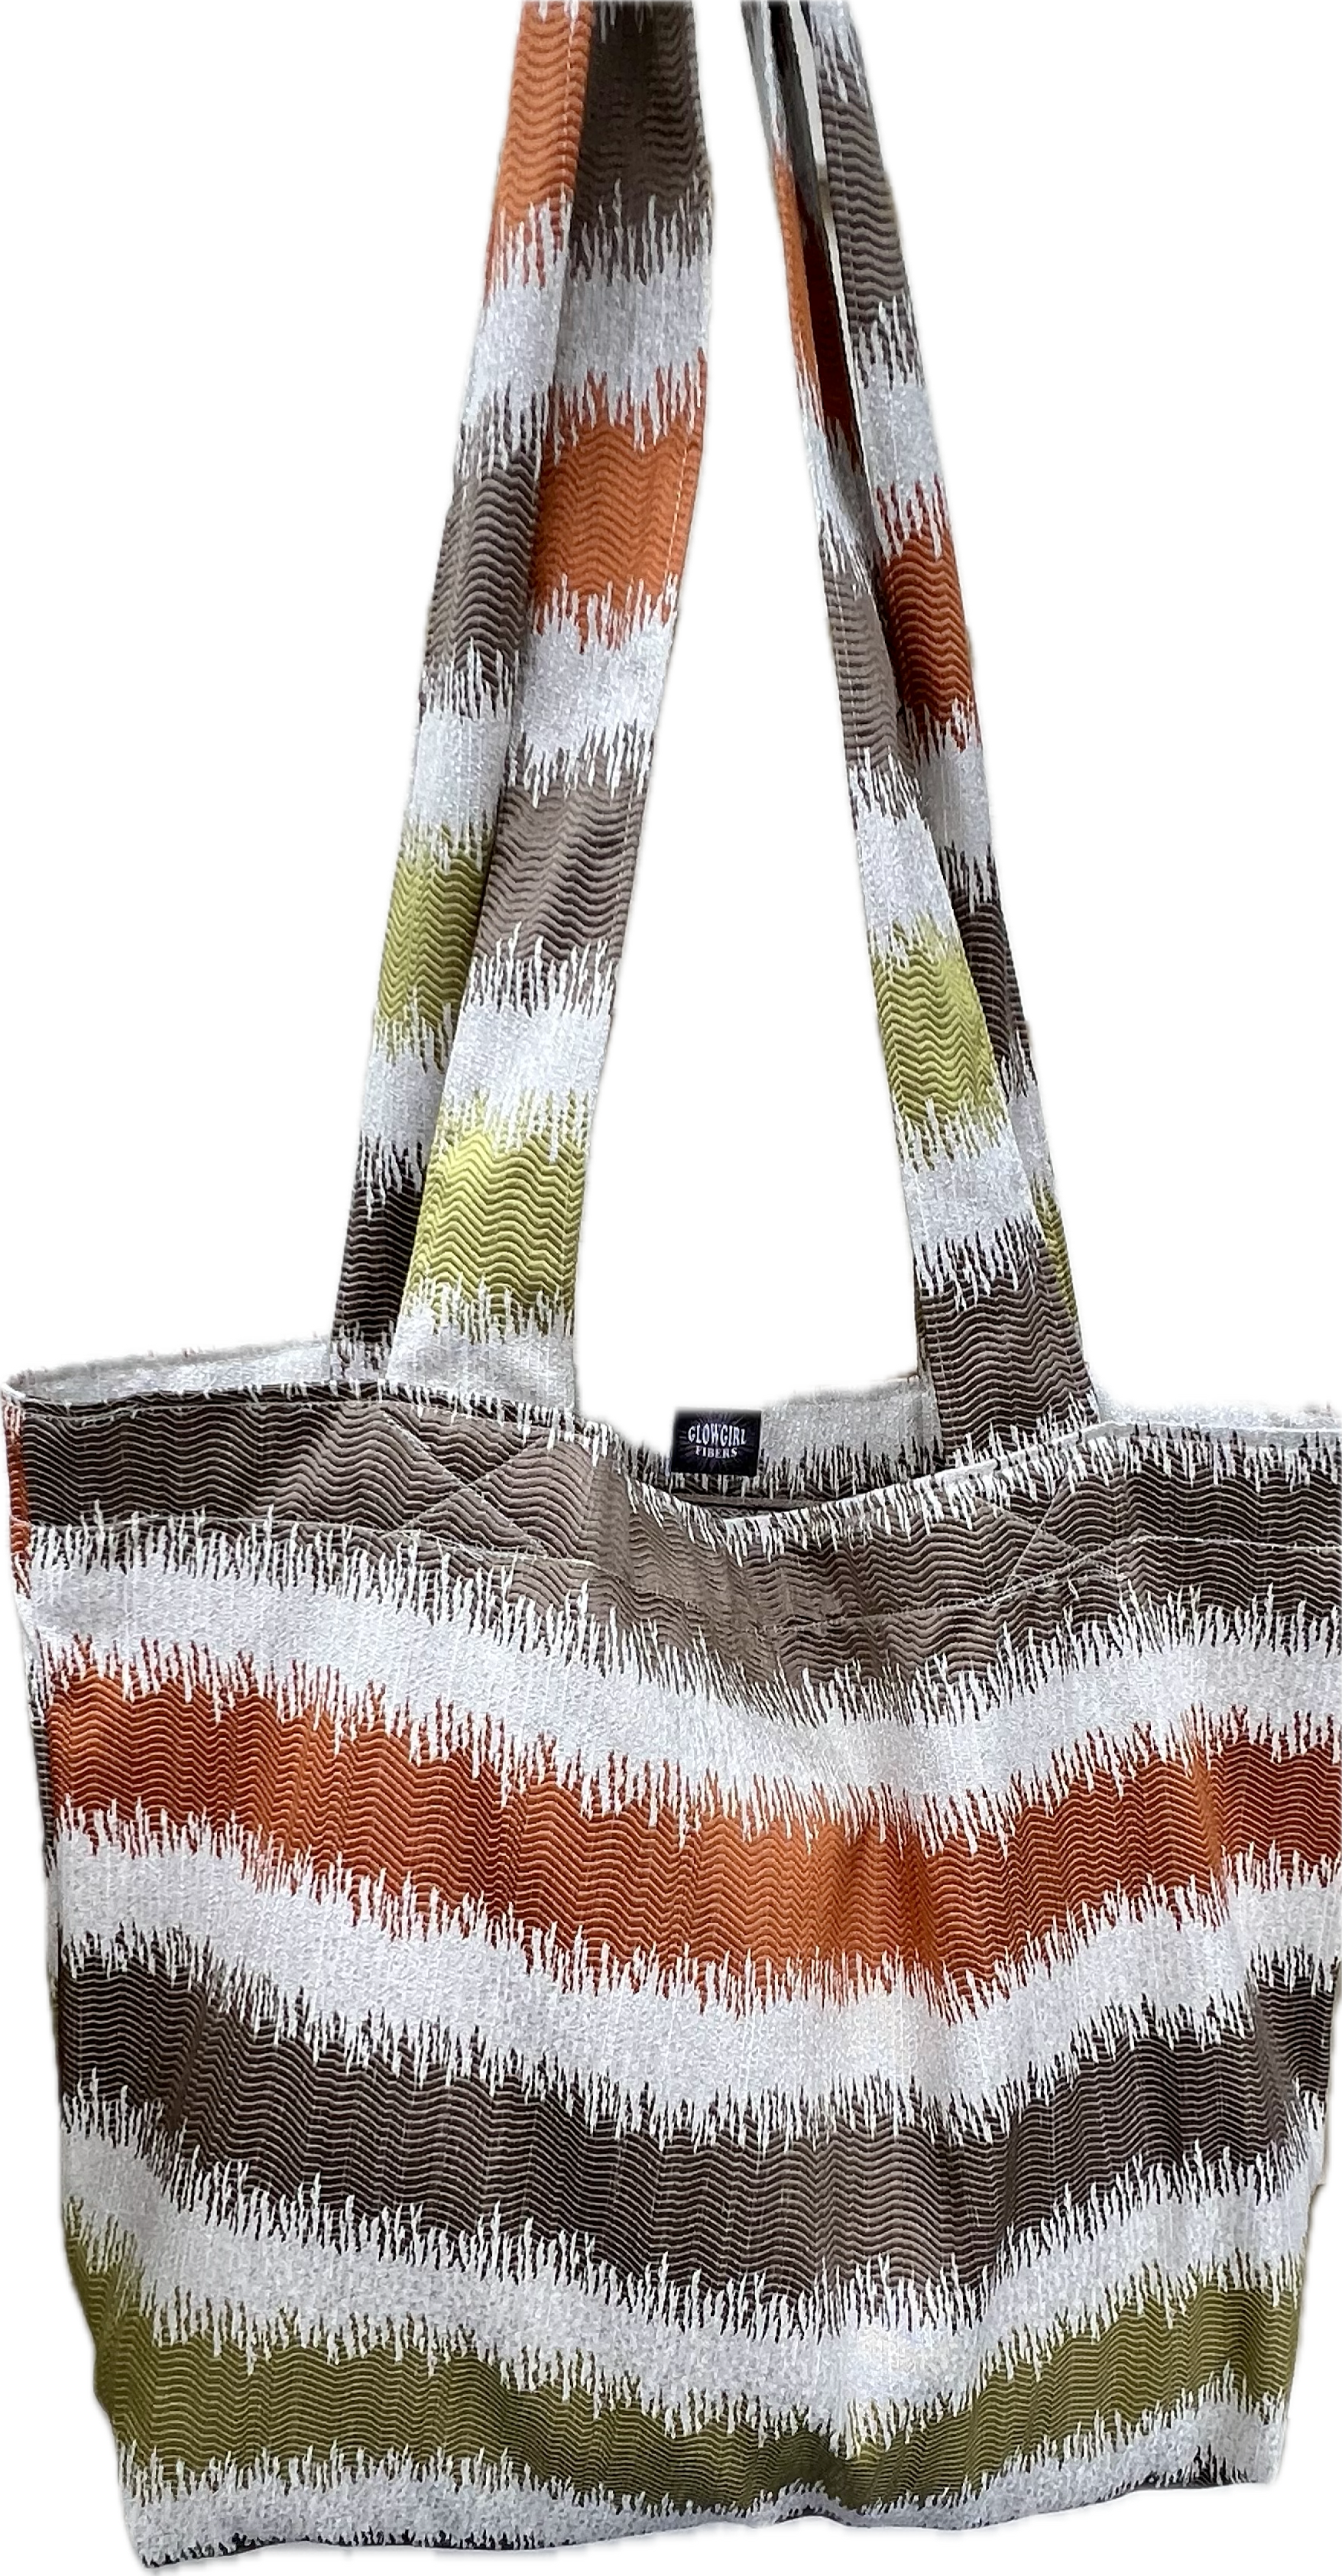 Market Grocery Tote Bag Olive Rust Tan Wavy Stripes